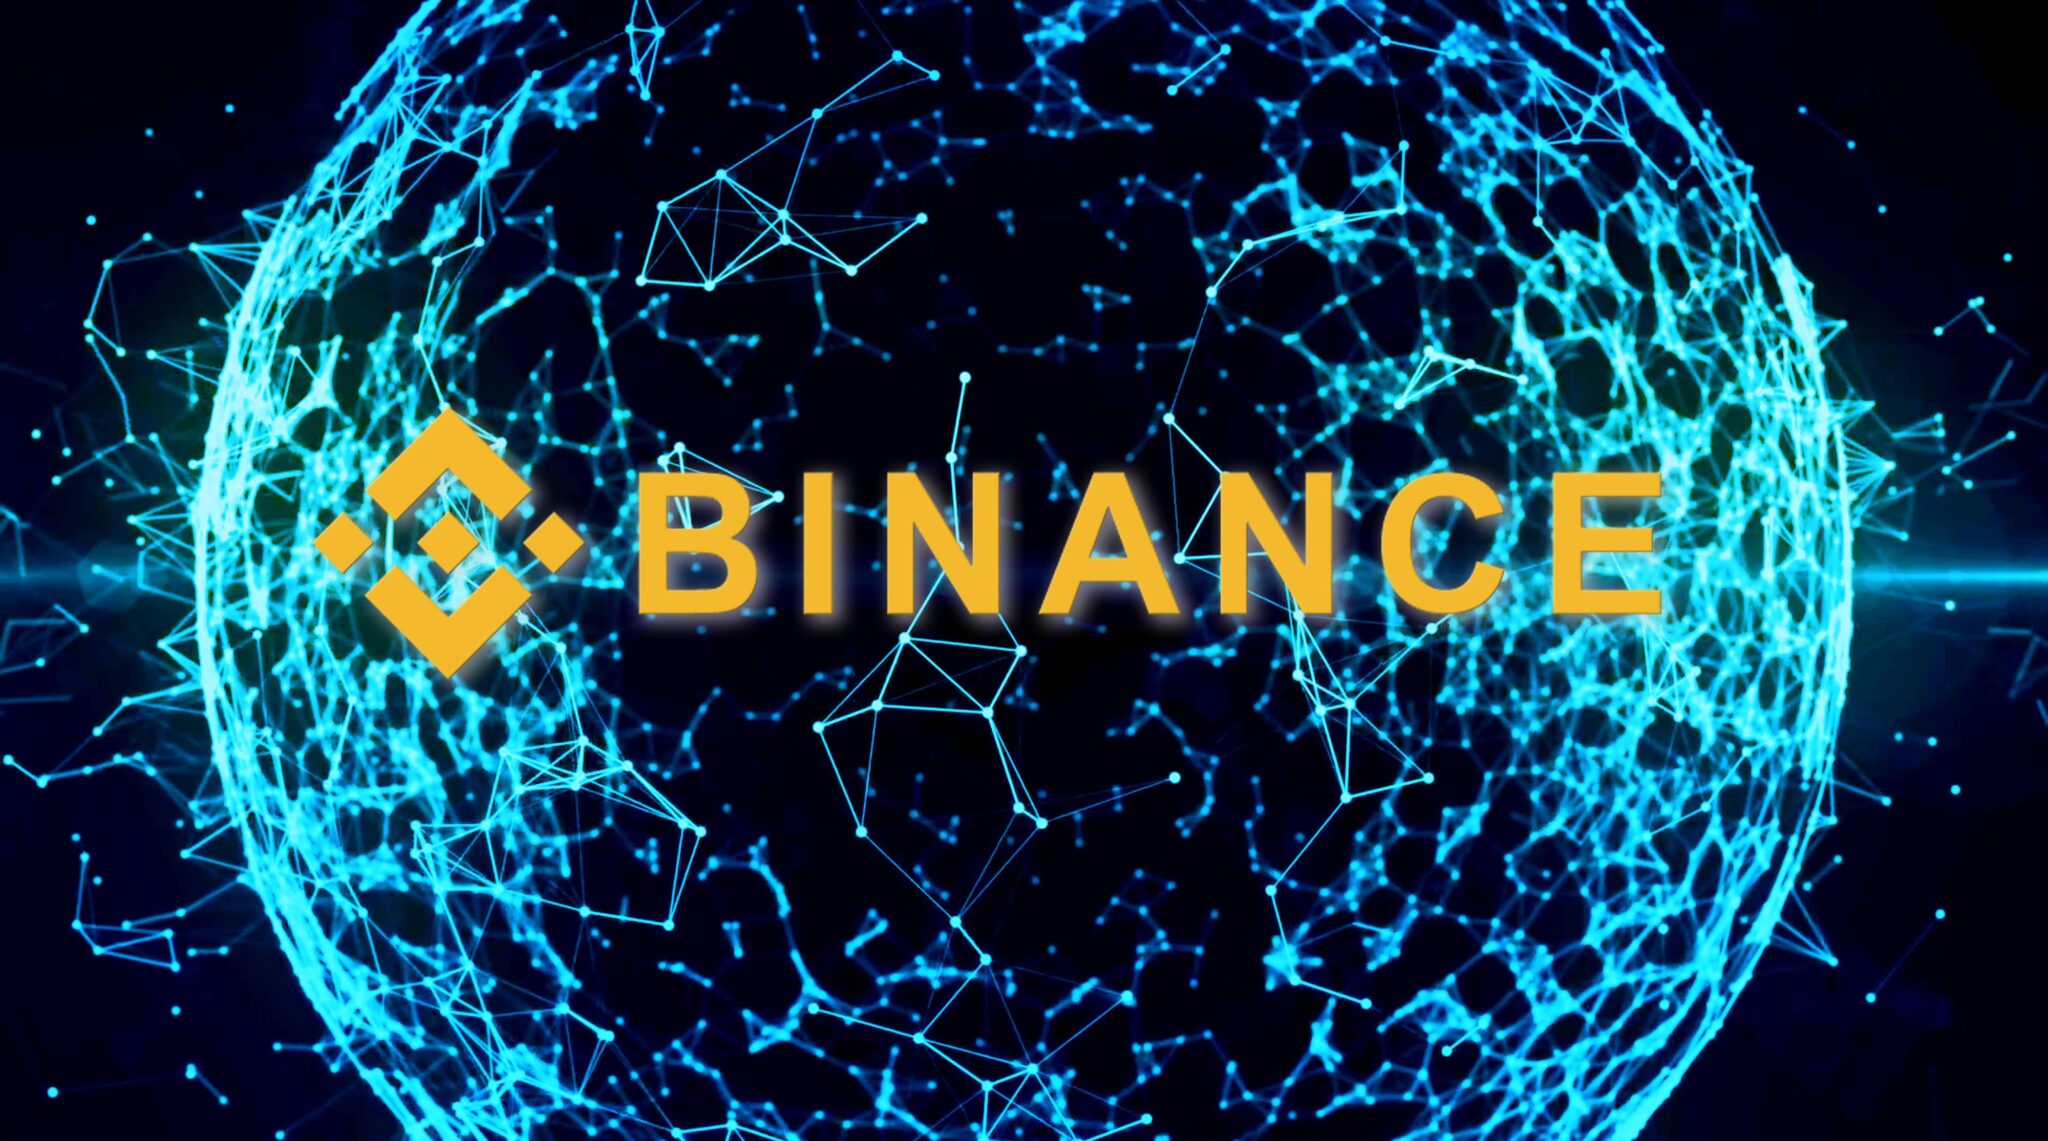 Binance Under Attack for Alleged Ties to China